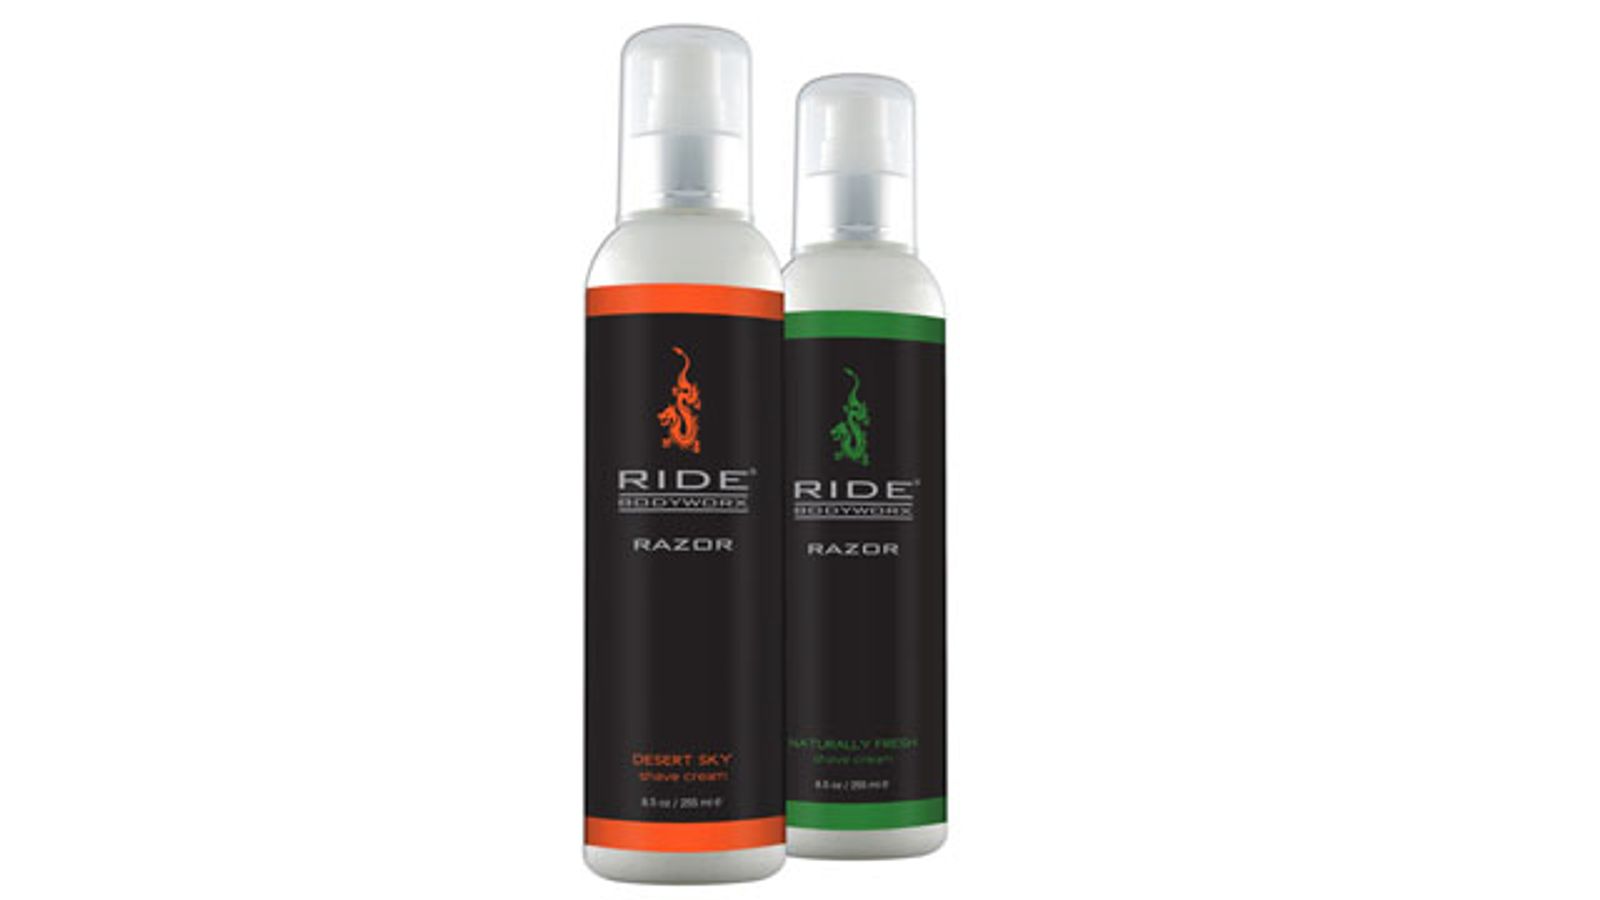 Sliquid Smooth Shave Creams Naturally Soften Hair After 1st Shave, Consumers Say